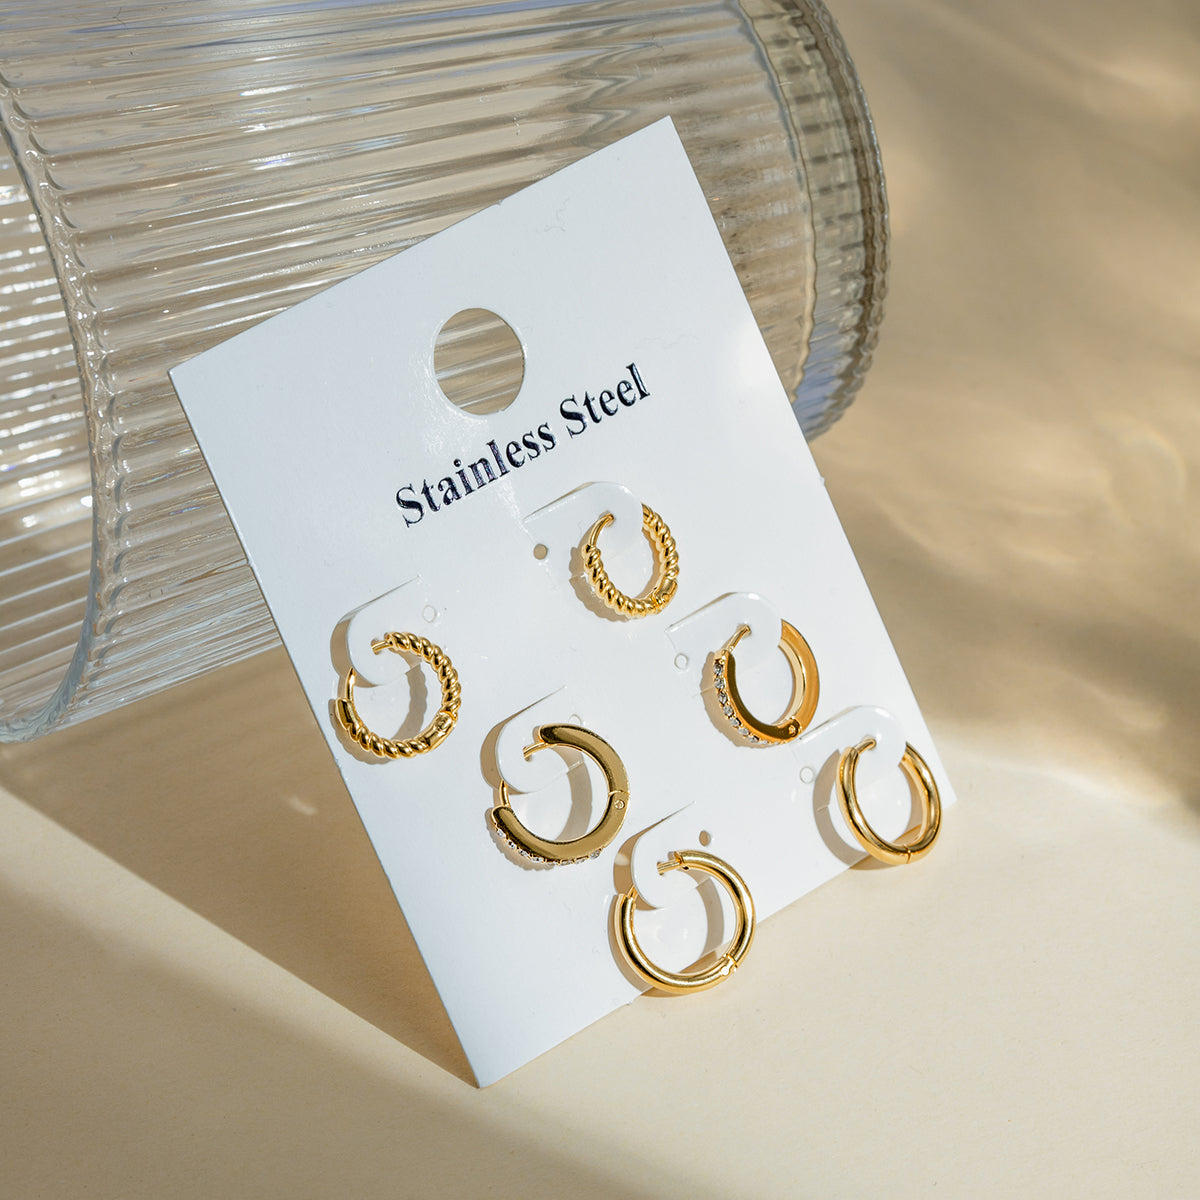 3 Pairs IG Style Circle 316 Stainless Steel  18K Gold Plated Ear Cuffs